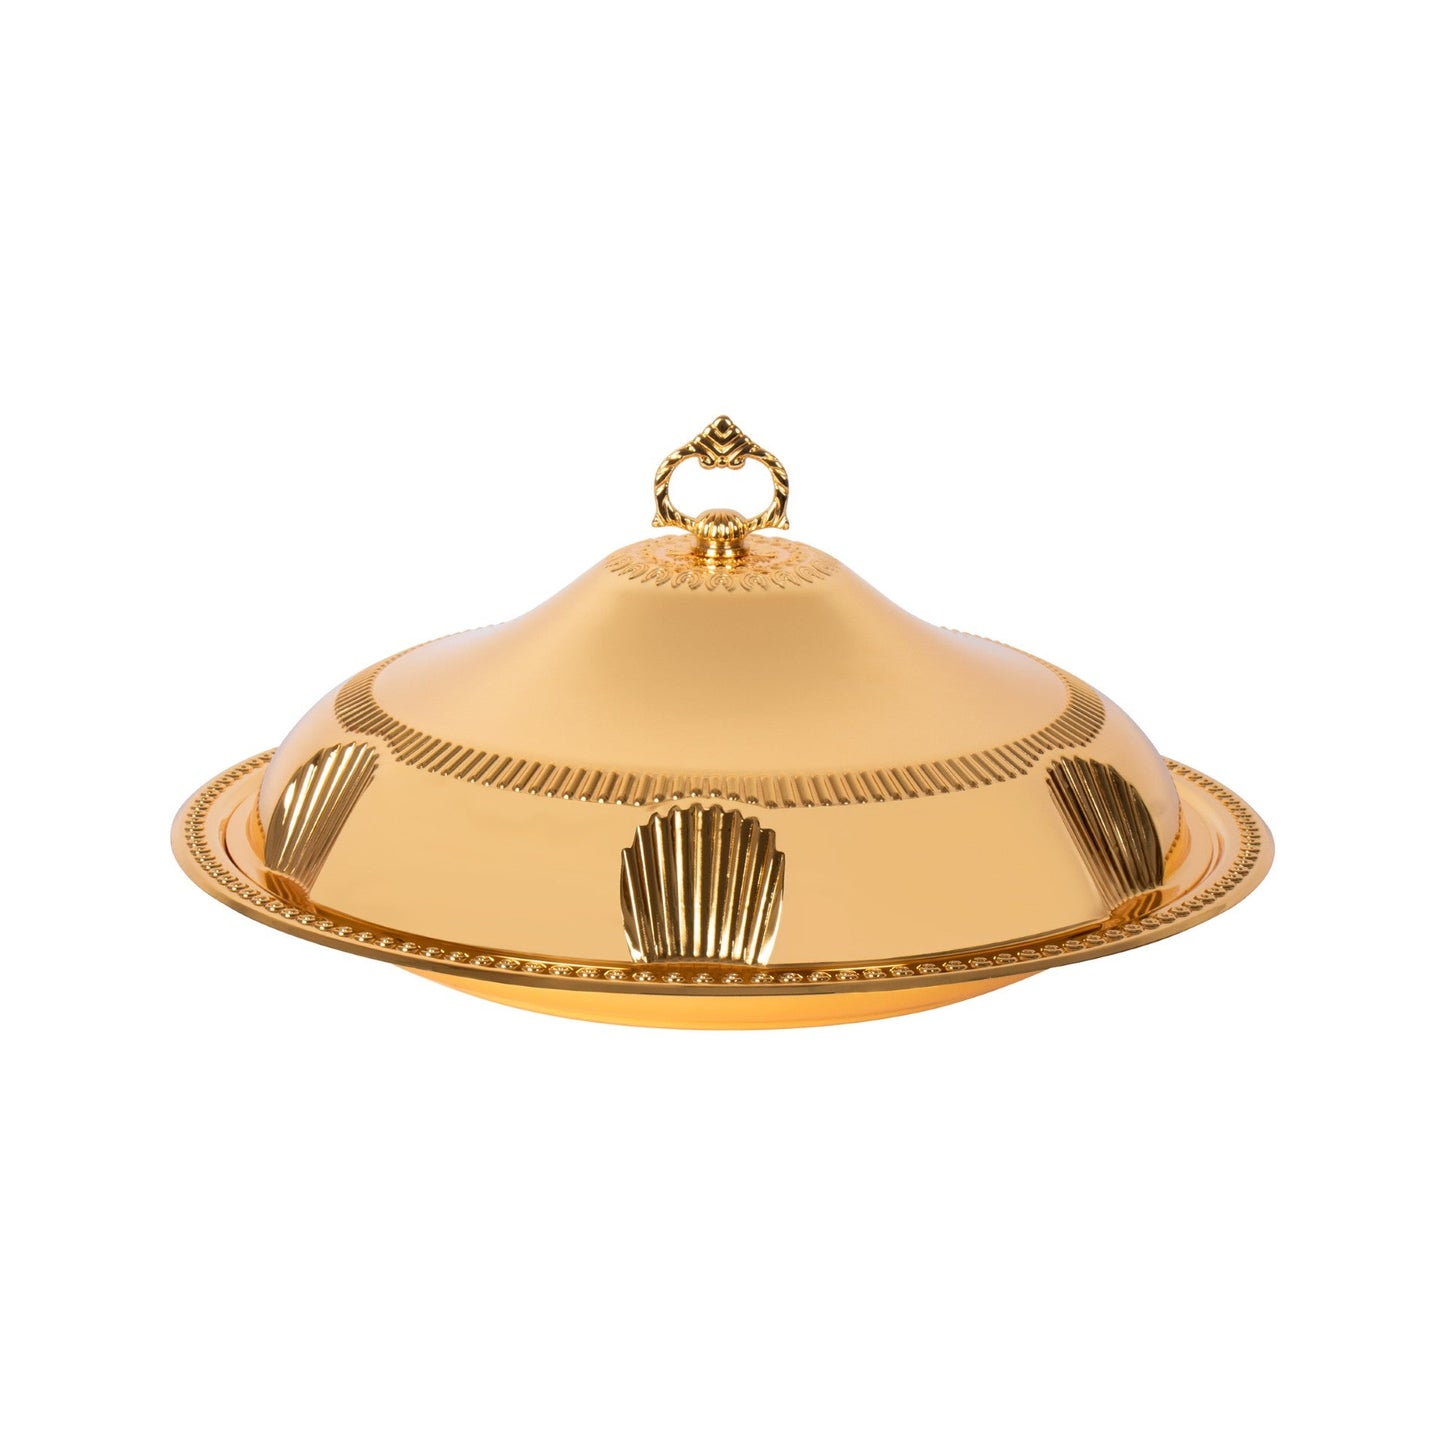 SQ Professional Durane Ornate Party Food Serving Cloche with Tray Gold 58328XLFG 48 x 48 x 12.5 cm Round 11204 (Big Parcel Rate)